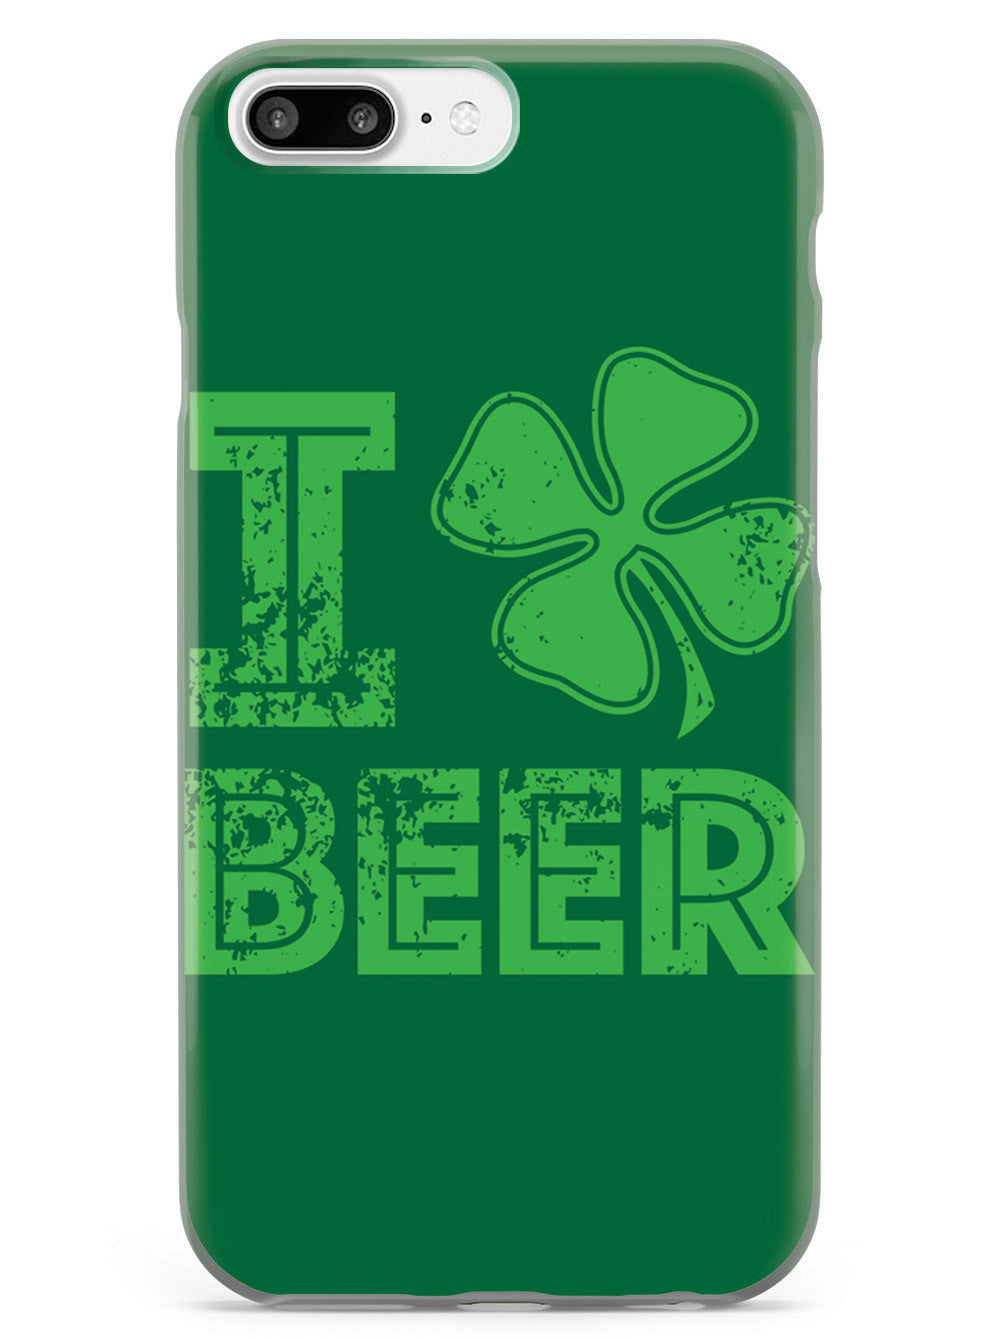 I Love Beer - St. Patrick's Day Four Leaf Clover Lucky Case